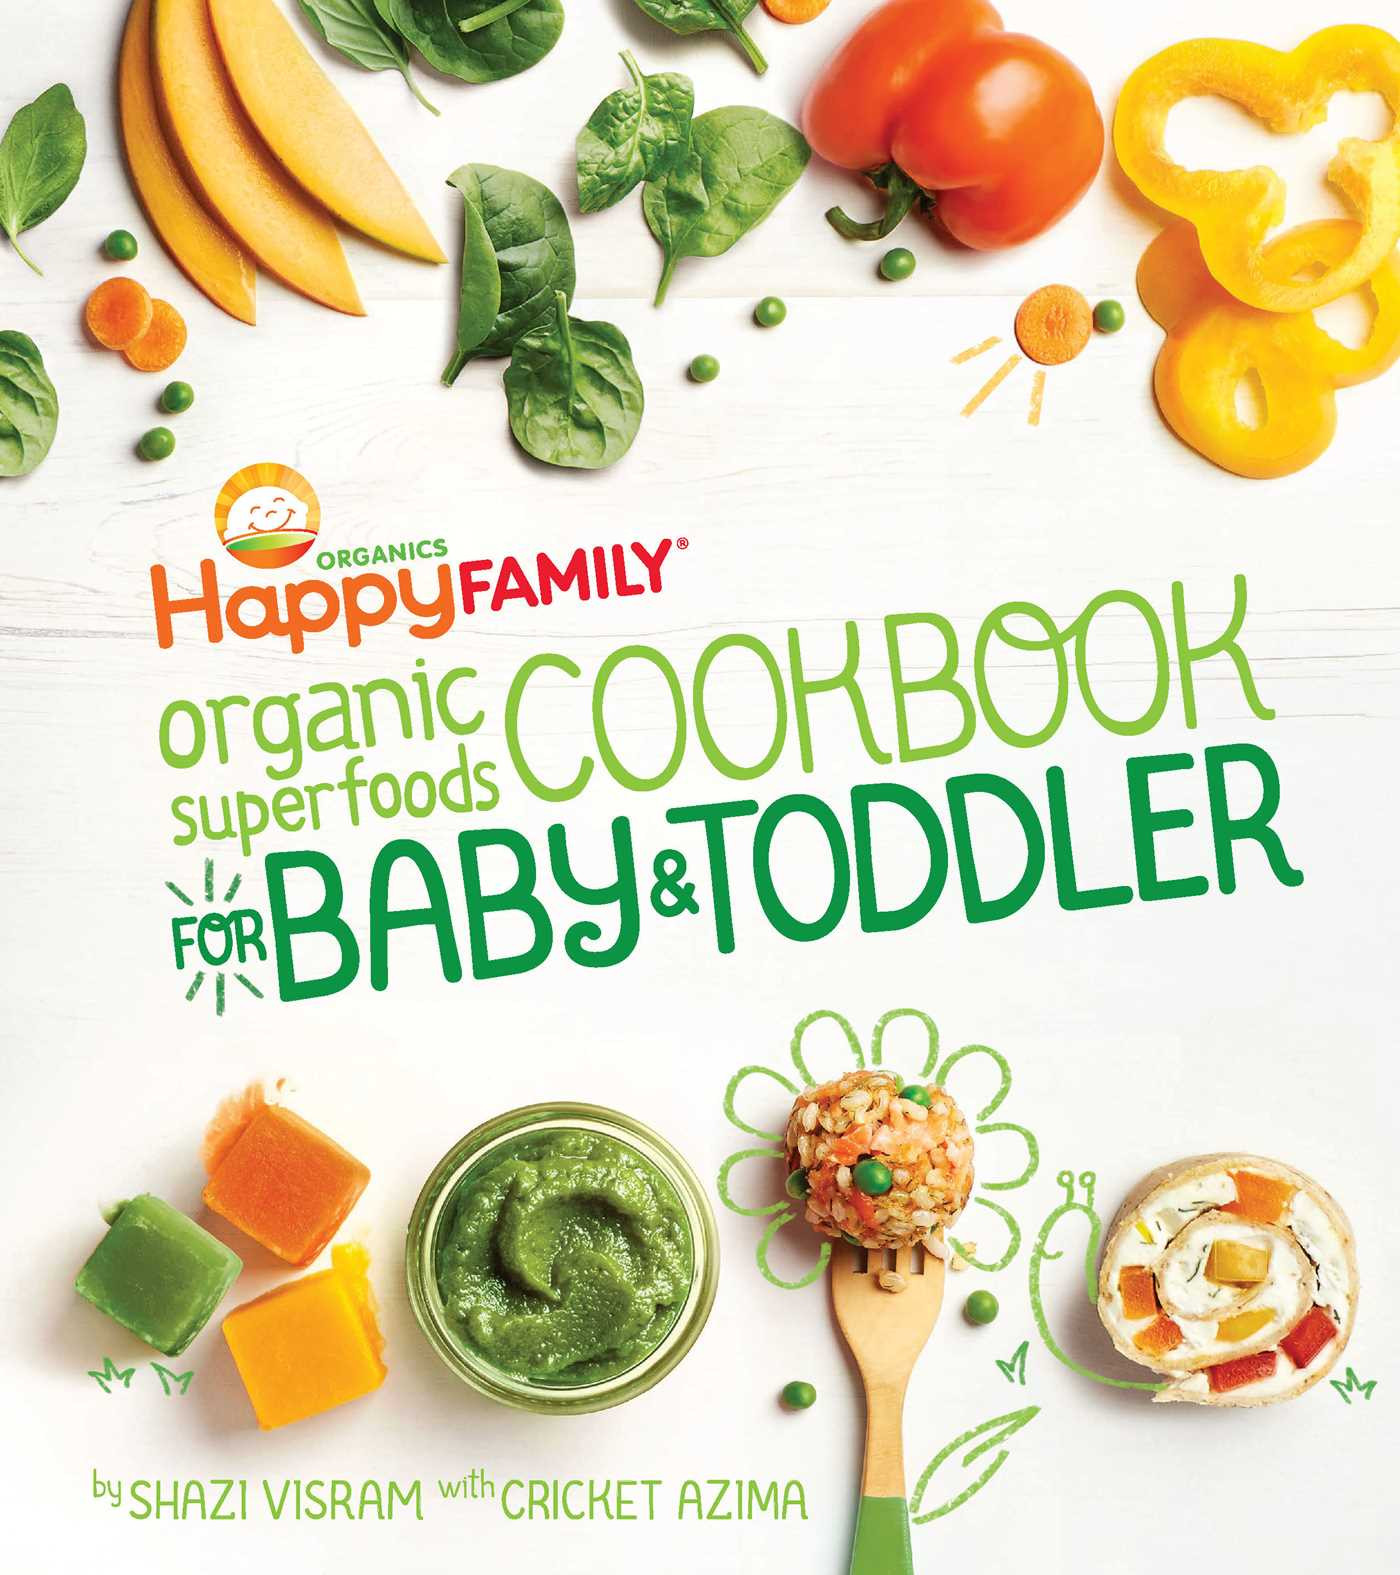 Real Baby Food: Easy, All-Natural Recipes For Your Baby And Toddler
 The Happy Family Organic Superfoods Cookbook For Baby